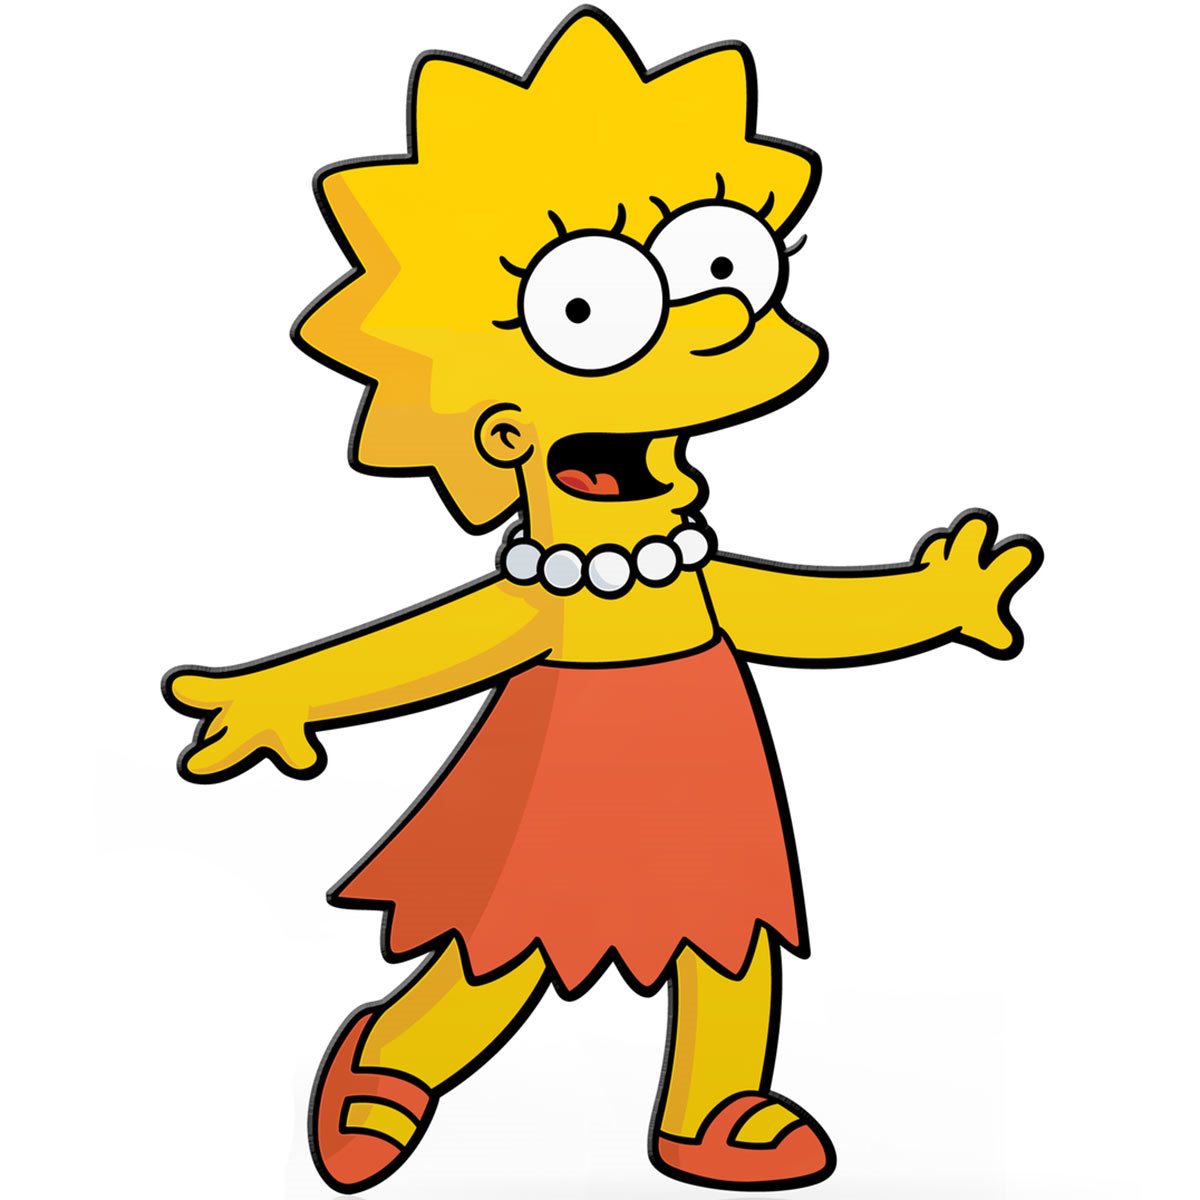 24 Facts About Lisa Simpson The Simpsons